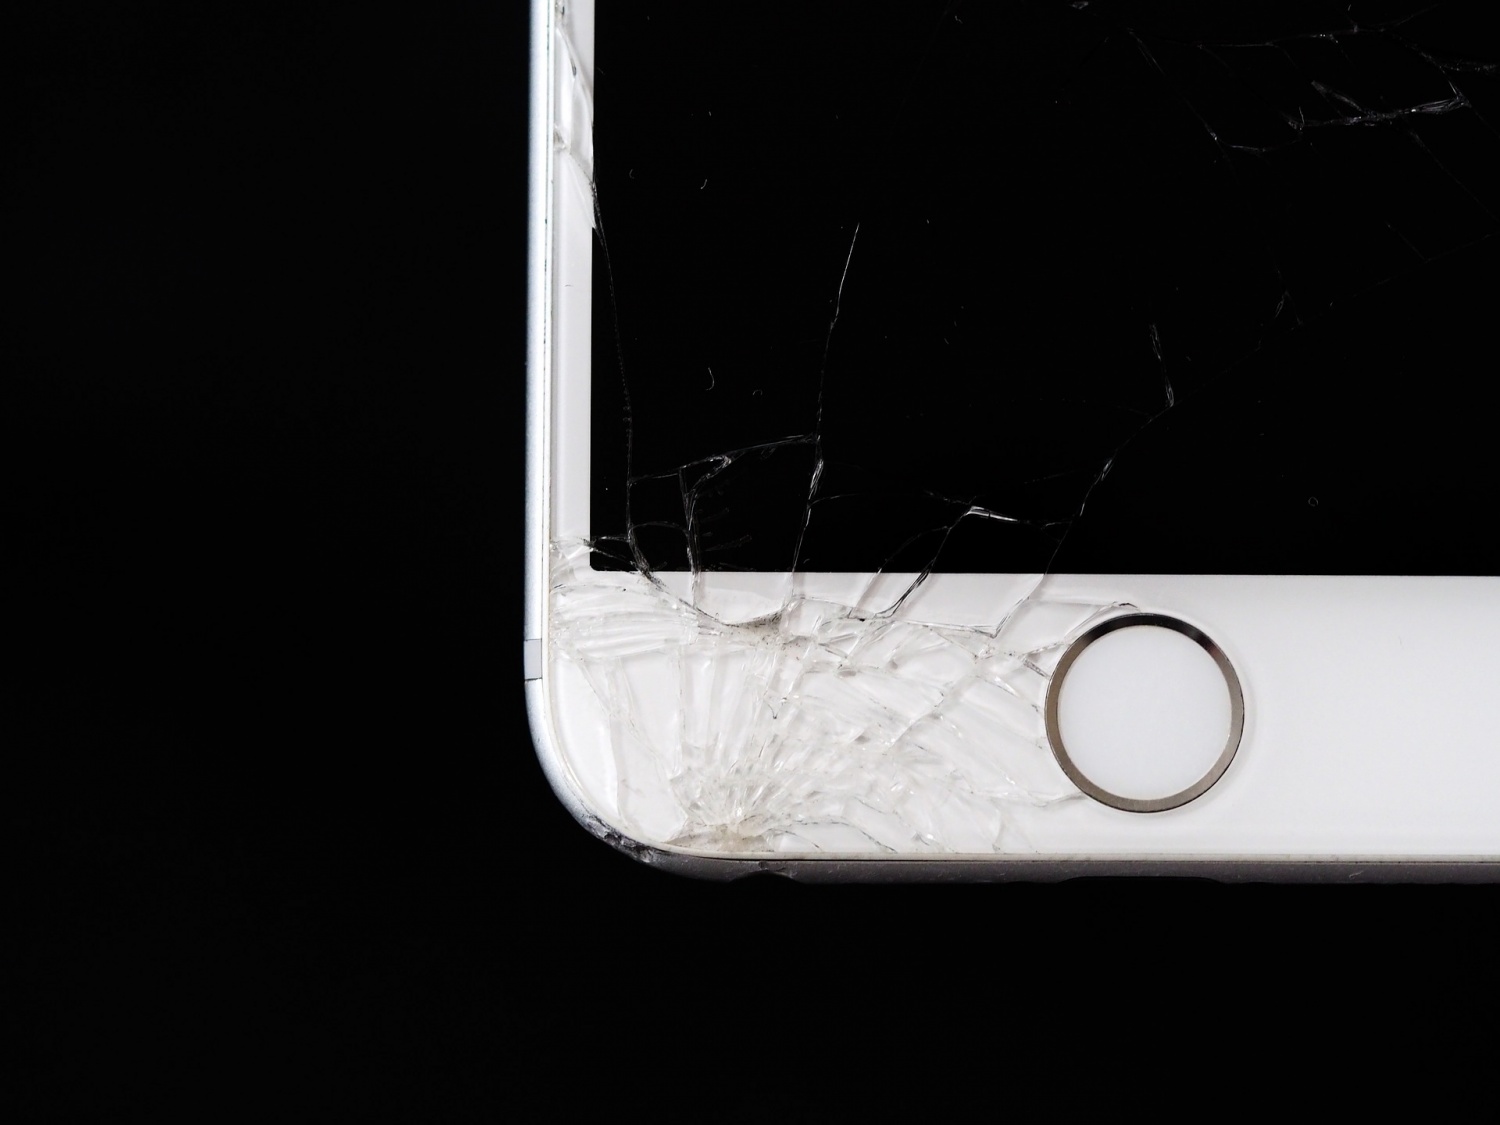 How to Fix iPhone Keeps Restarting